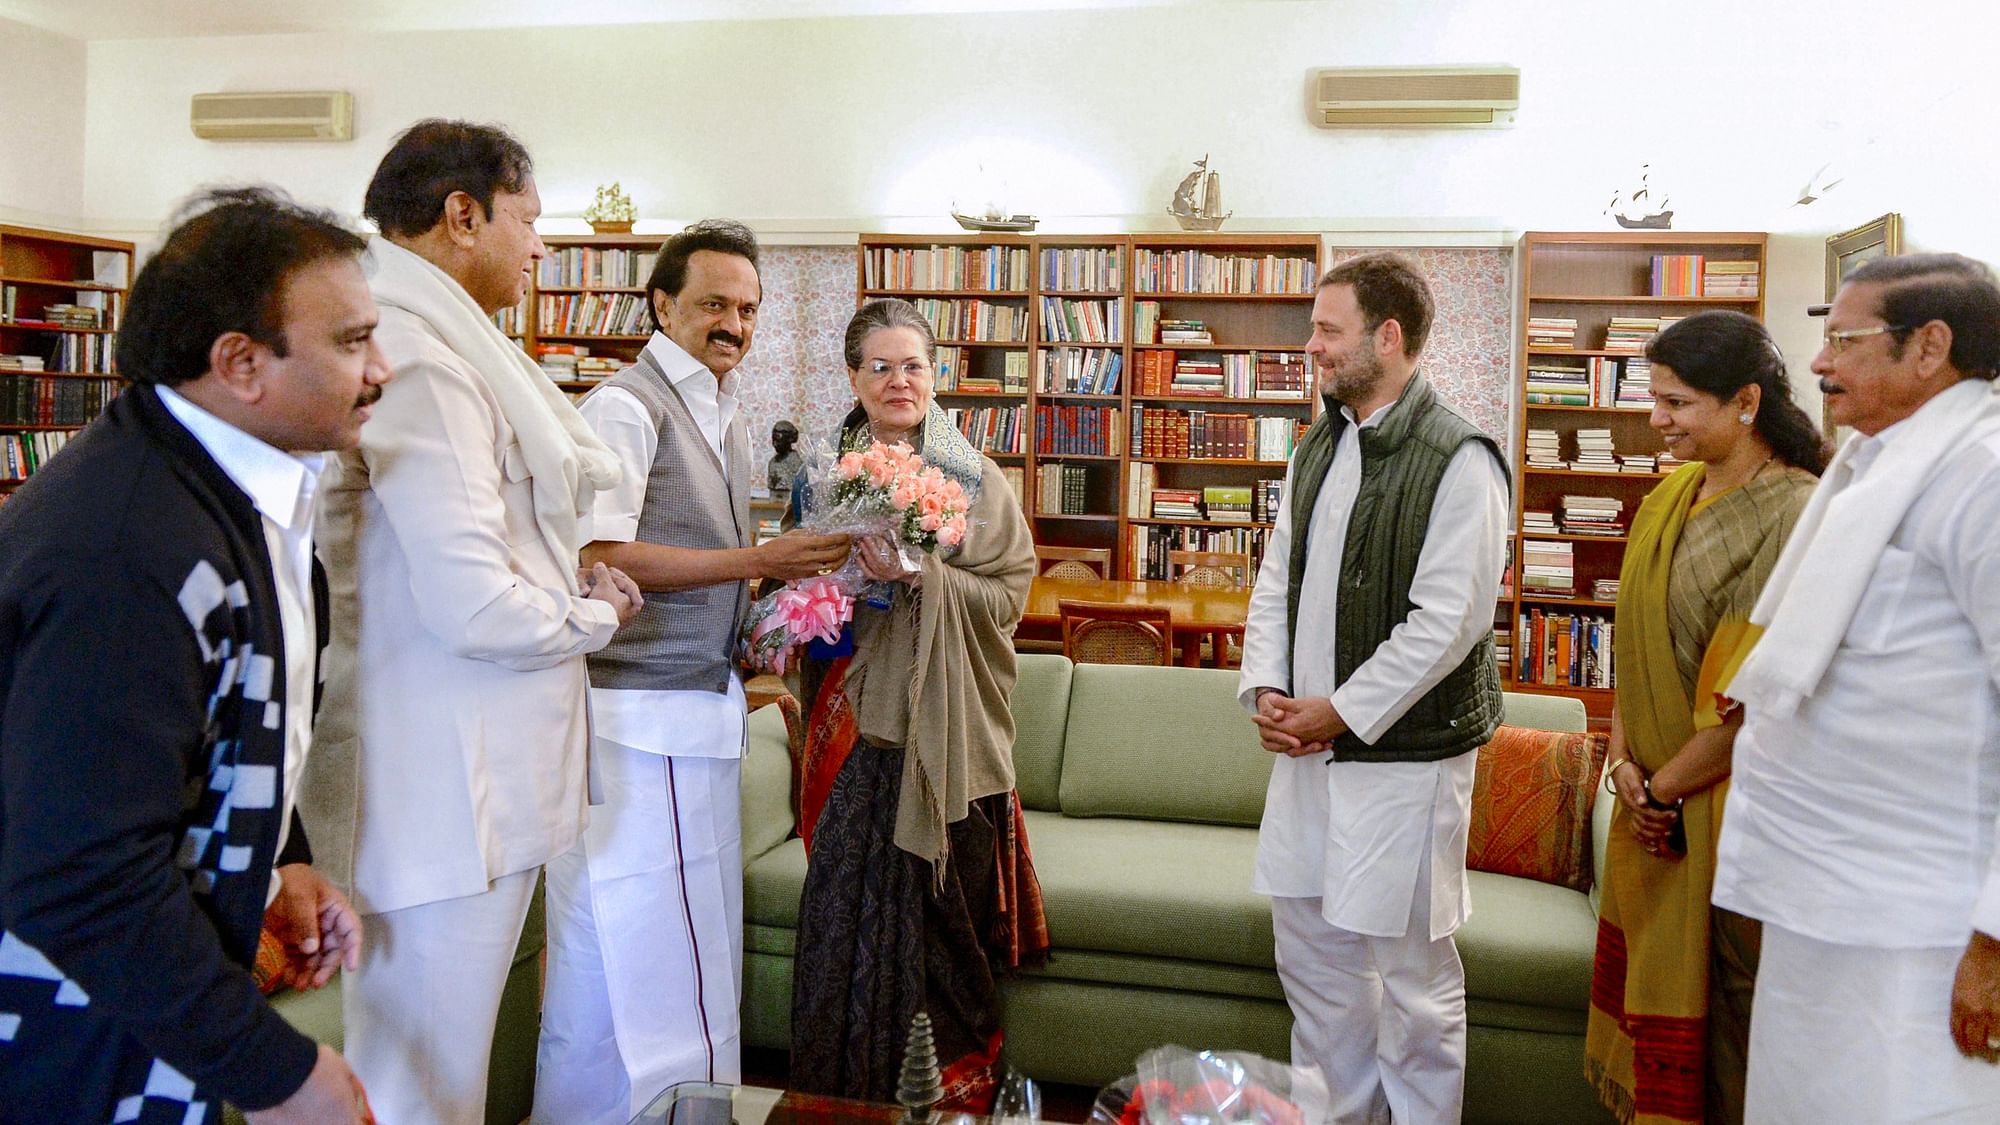 DMK President MK Stalin offers a bouquet to former Congress president Sonia Gandhi on the occasion of her birth anniversary, in New Delhi